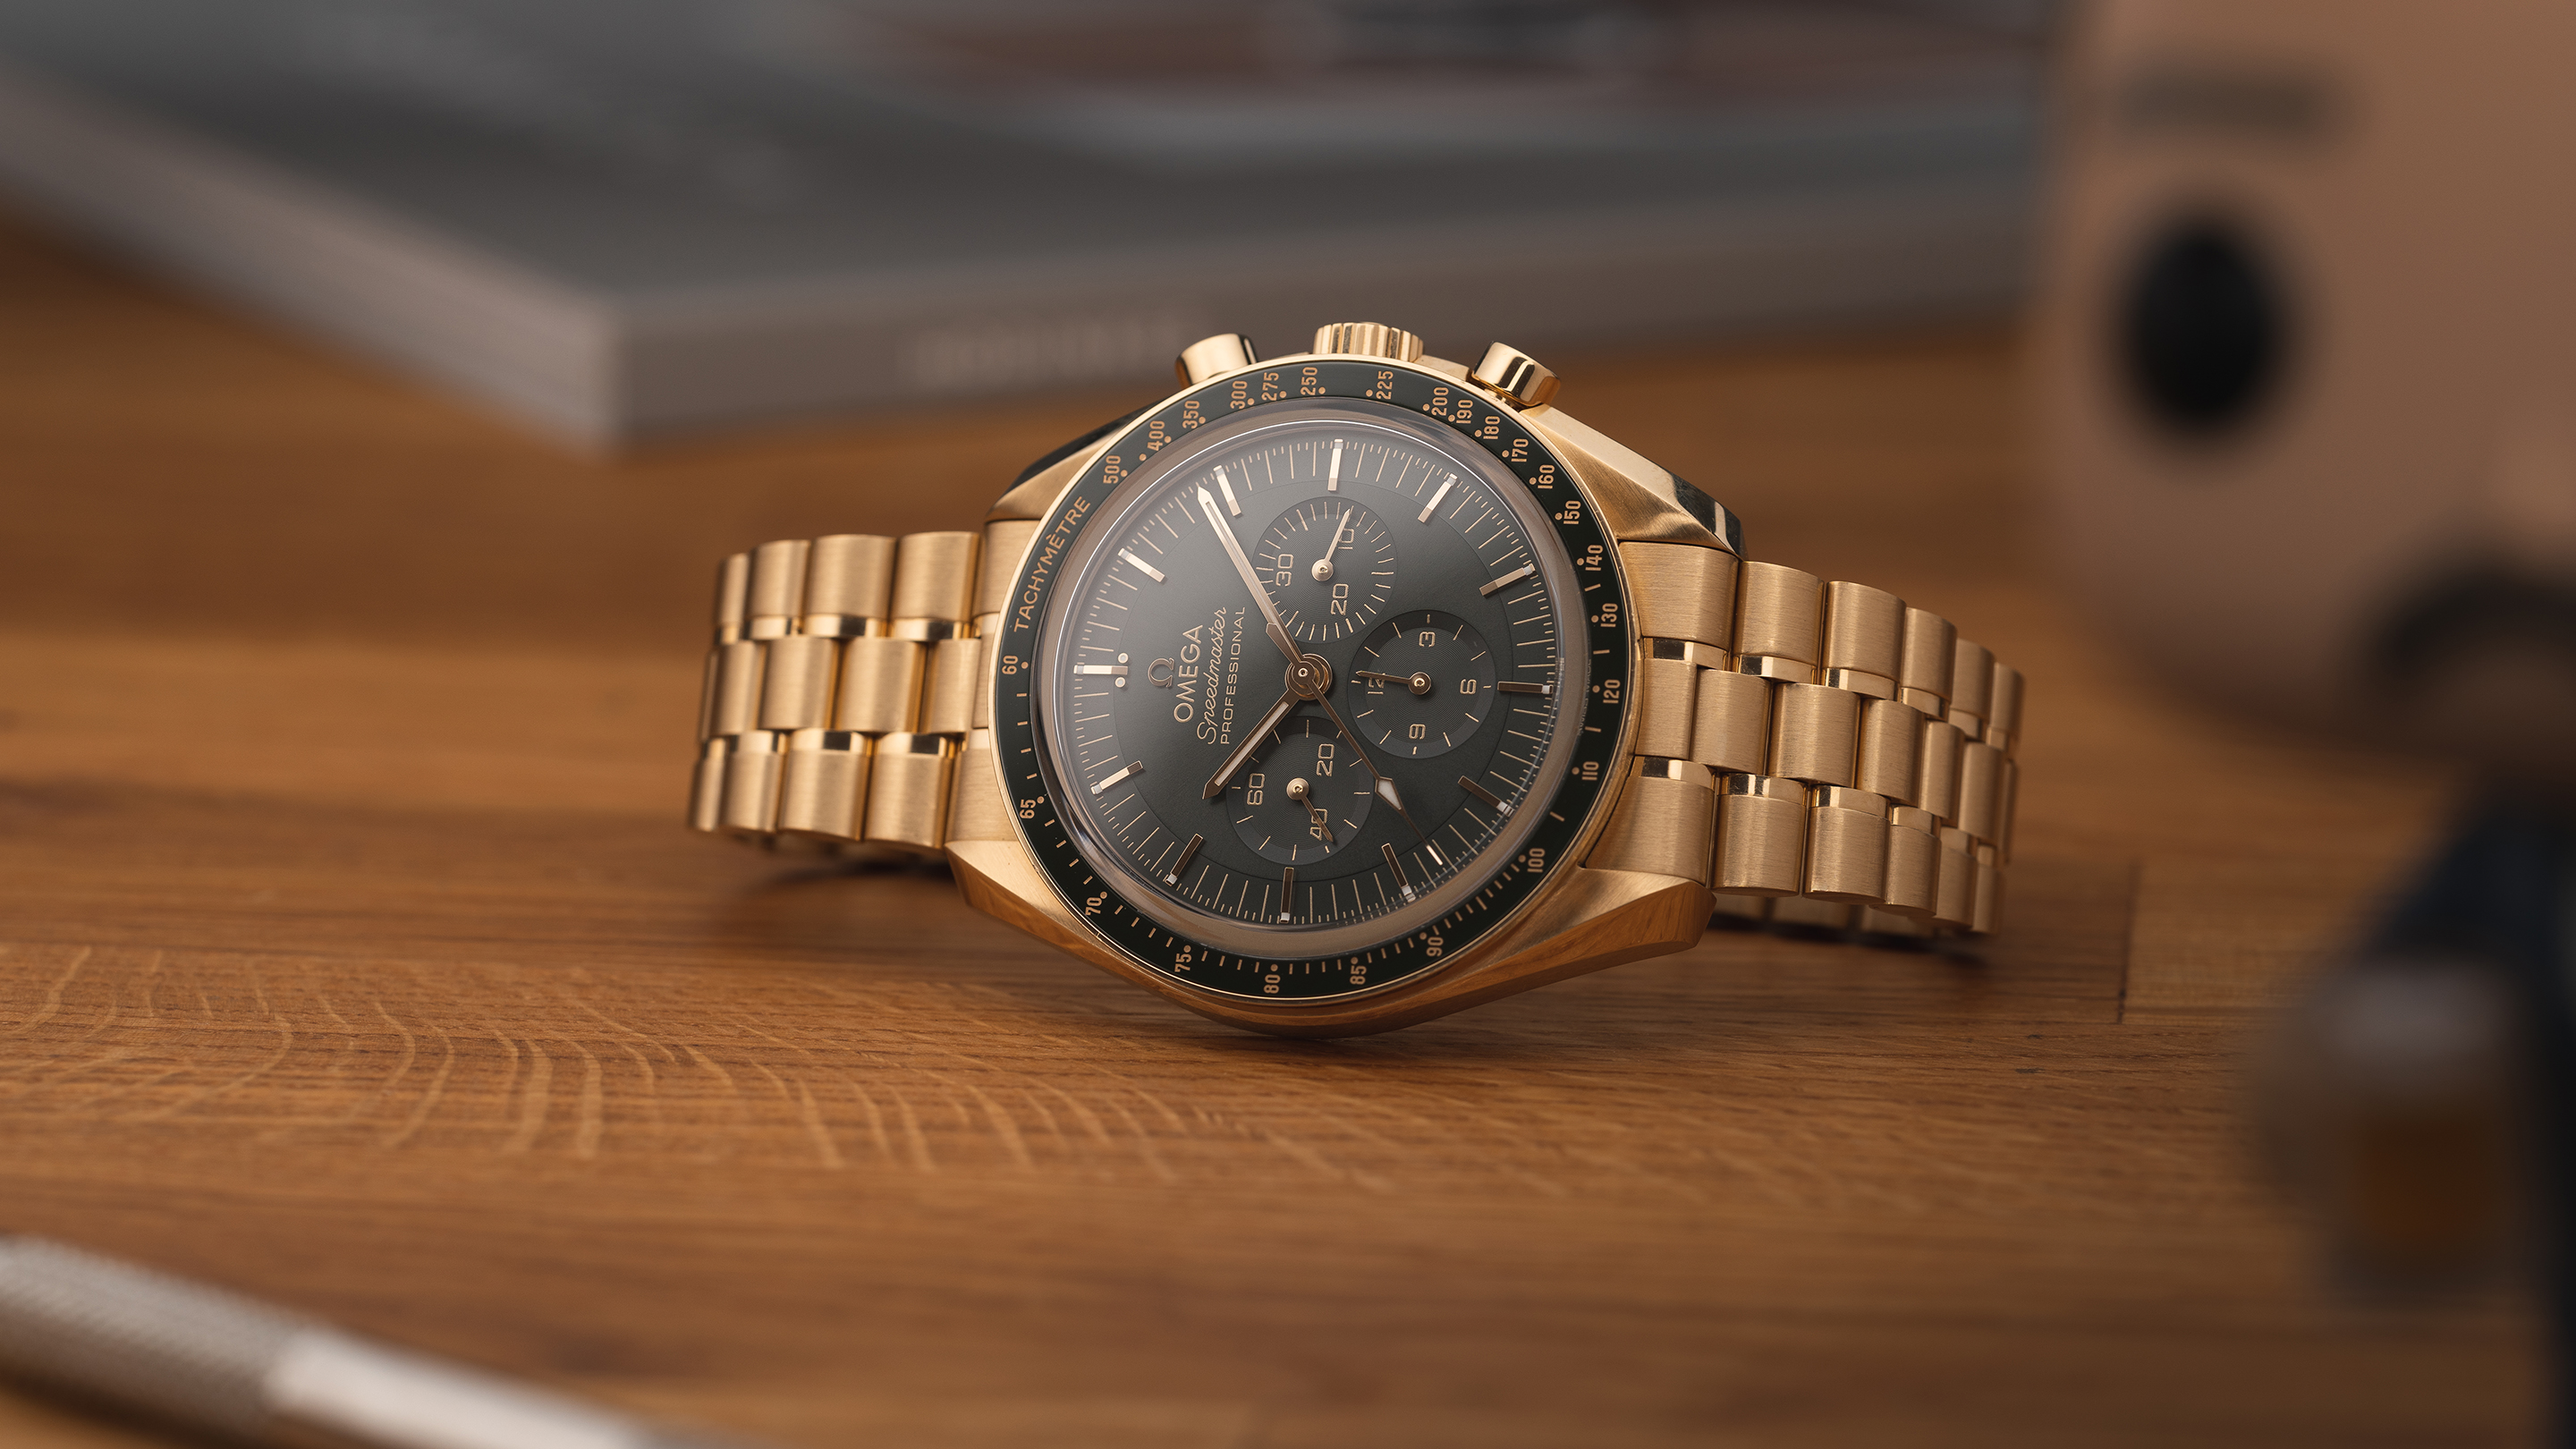 A Week On The Wrist With The Omega Speedmaster Moonwatch